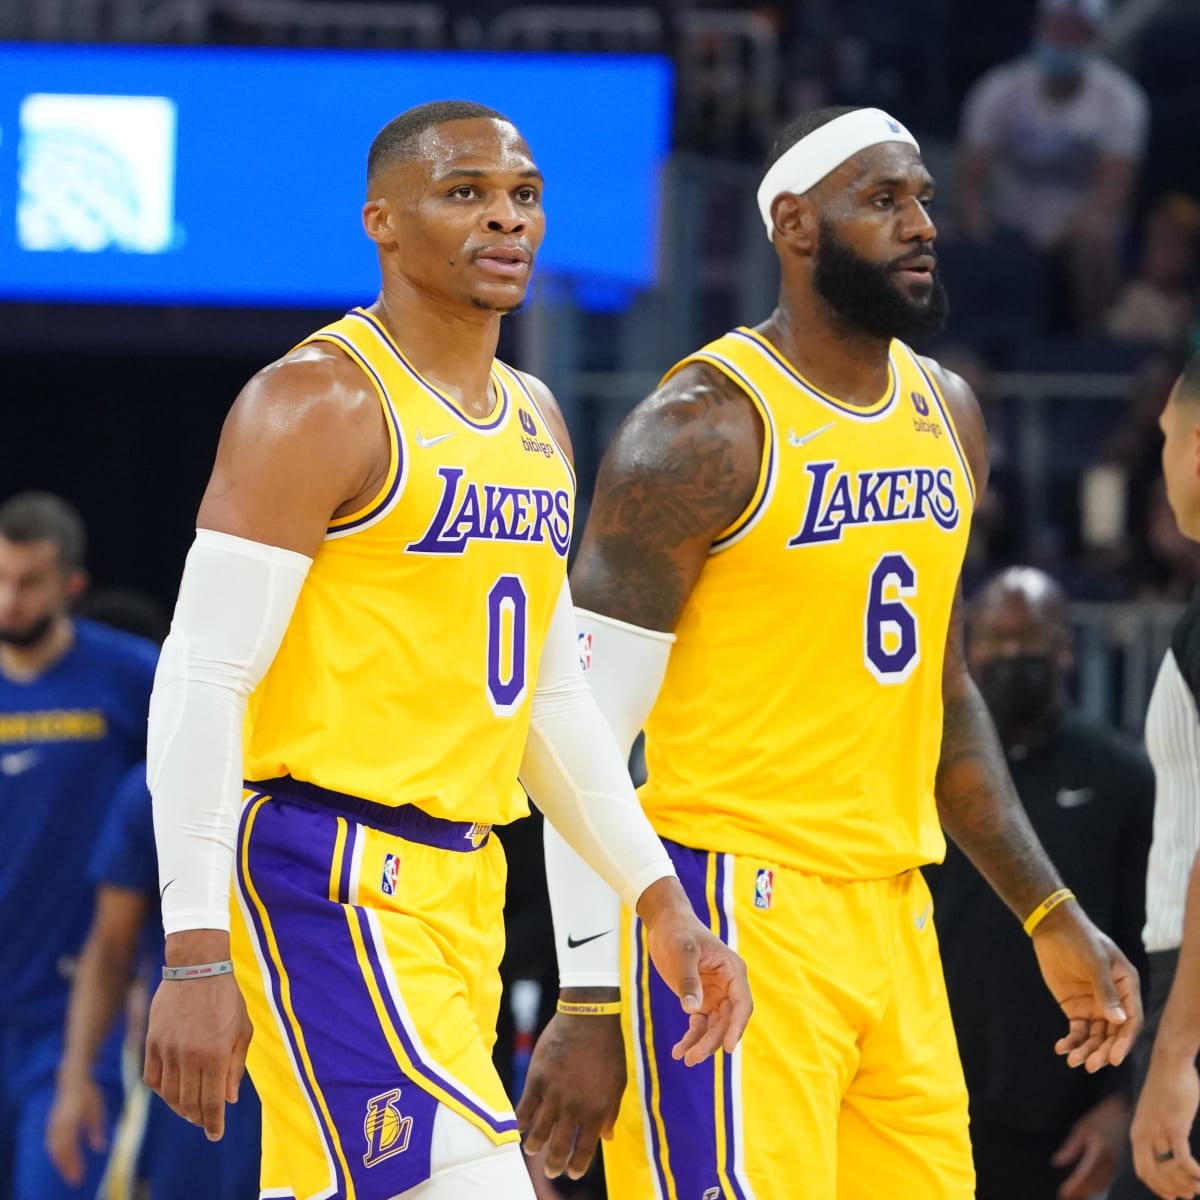 When it comes to reeling Lakers, it's wise to take big-picture approach